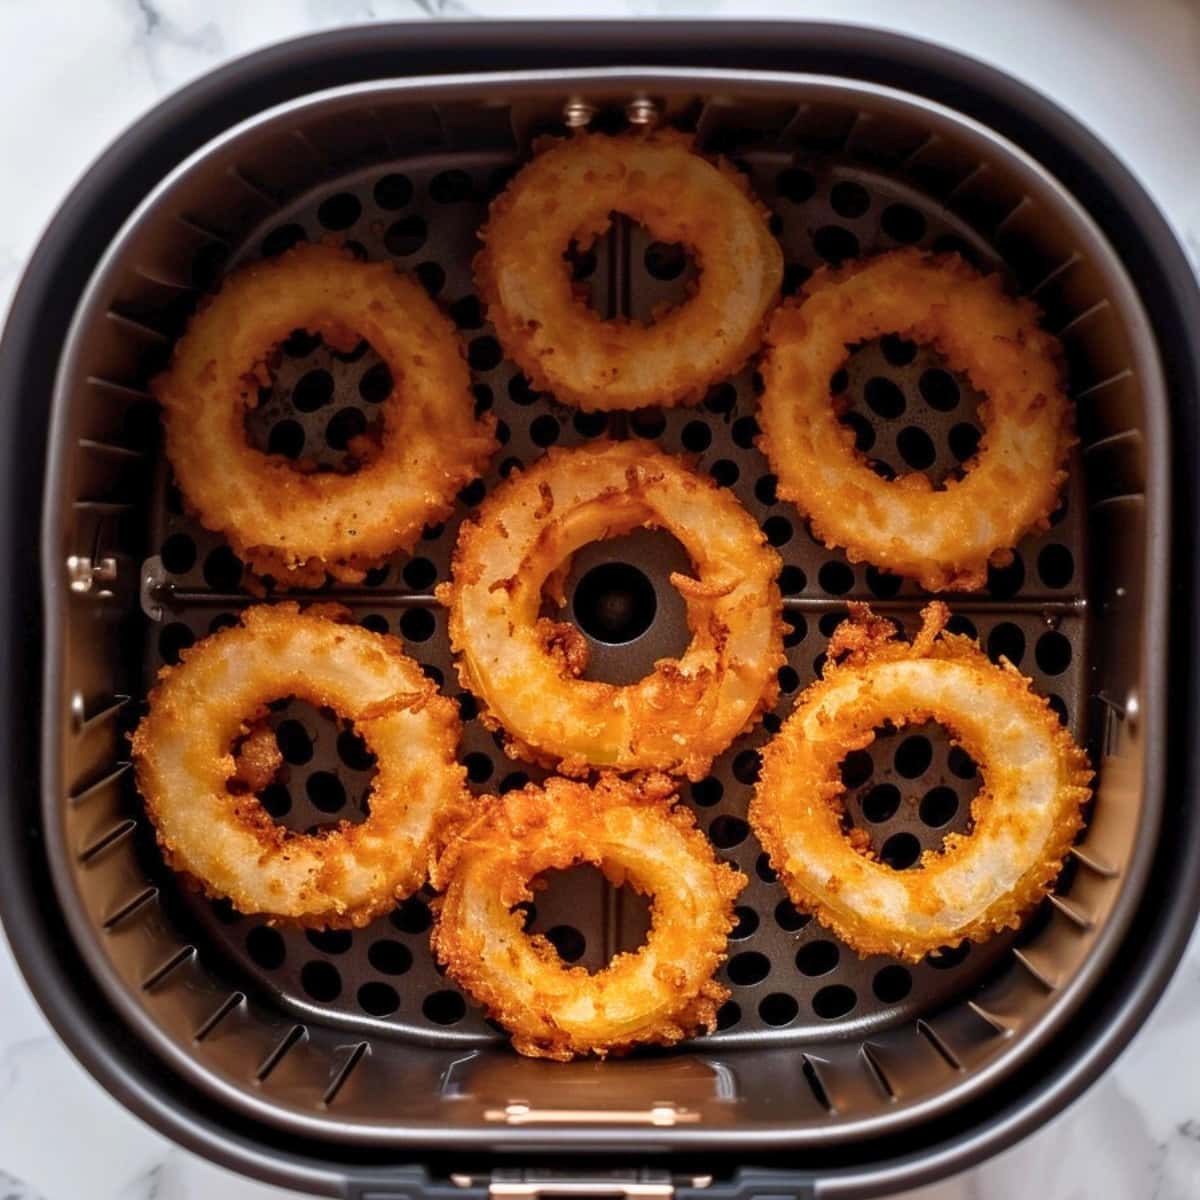 Onion rings in the air fryer.